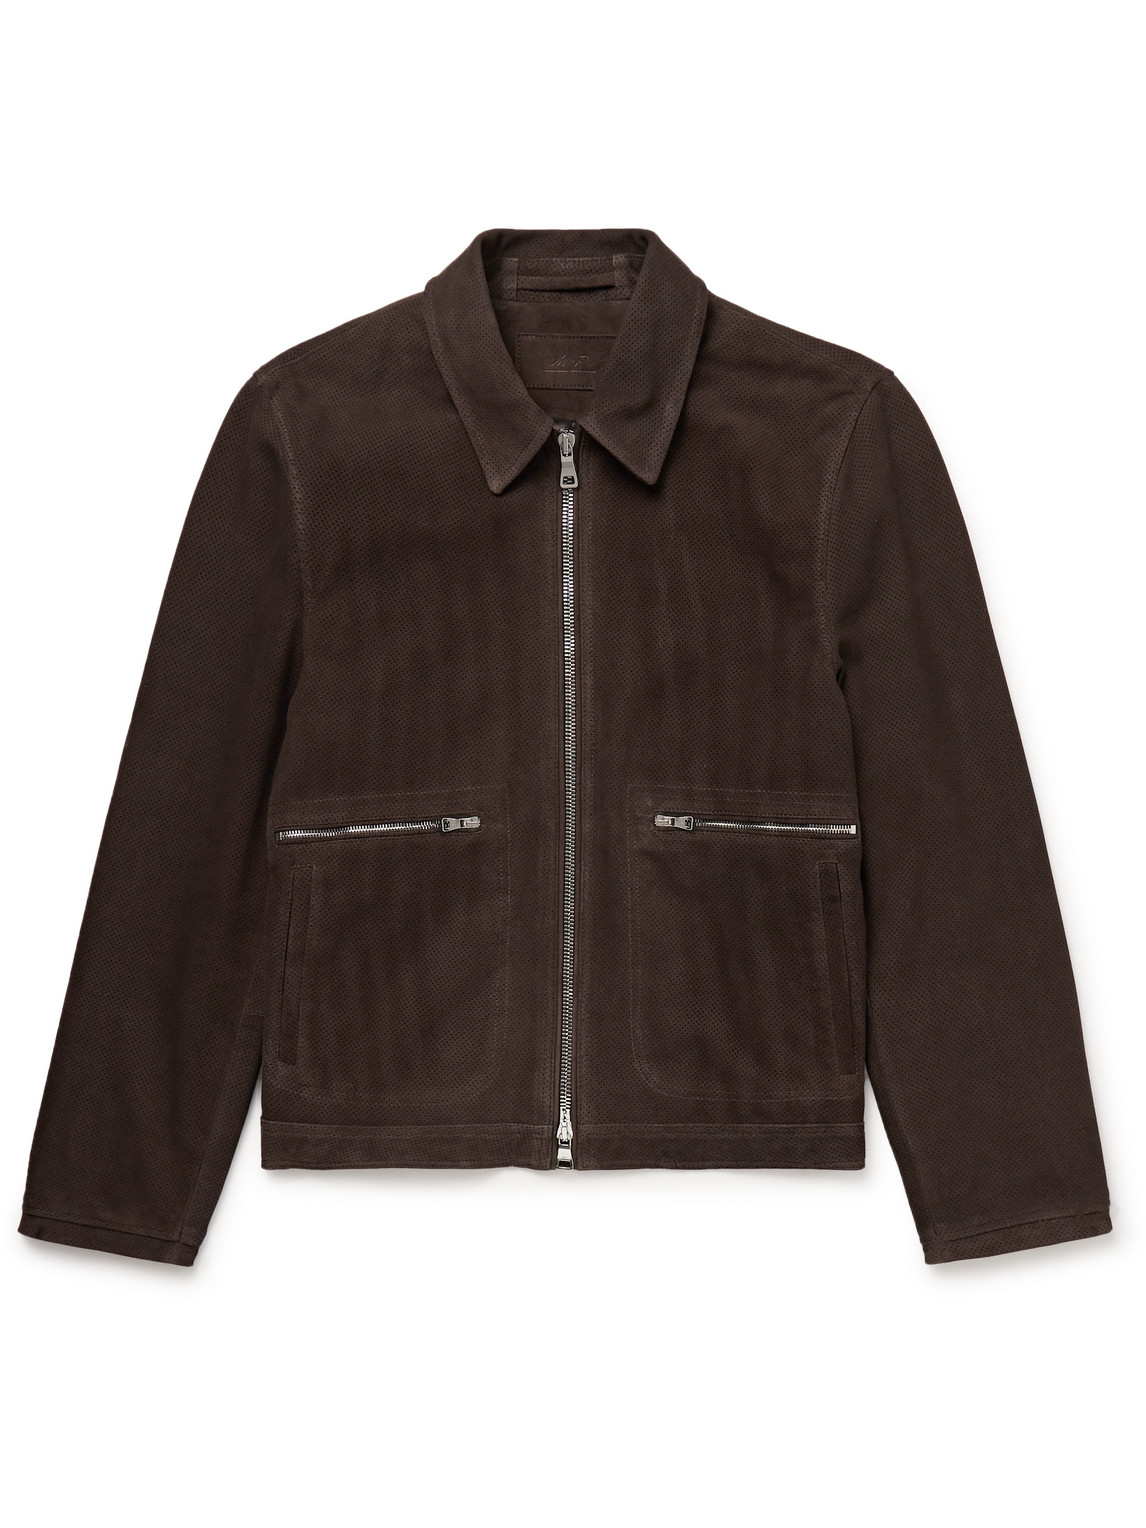 Mr P Perforated Suede Blouson Jacket In Brown